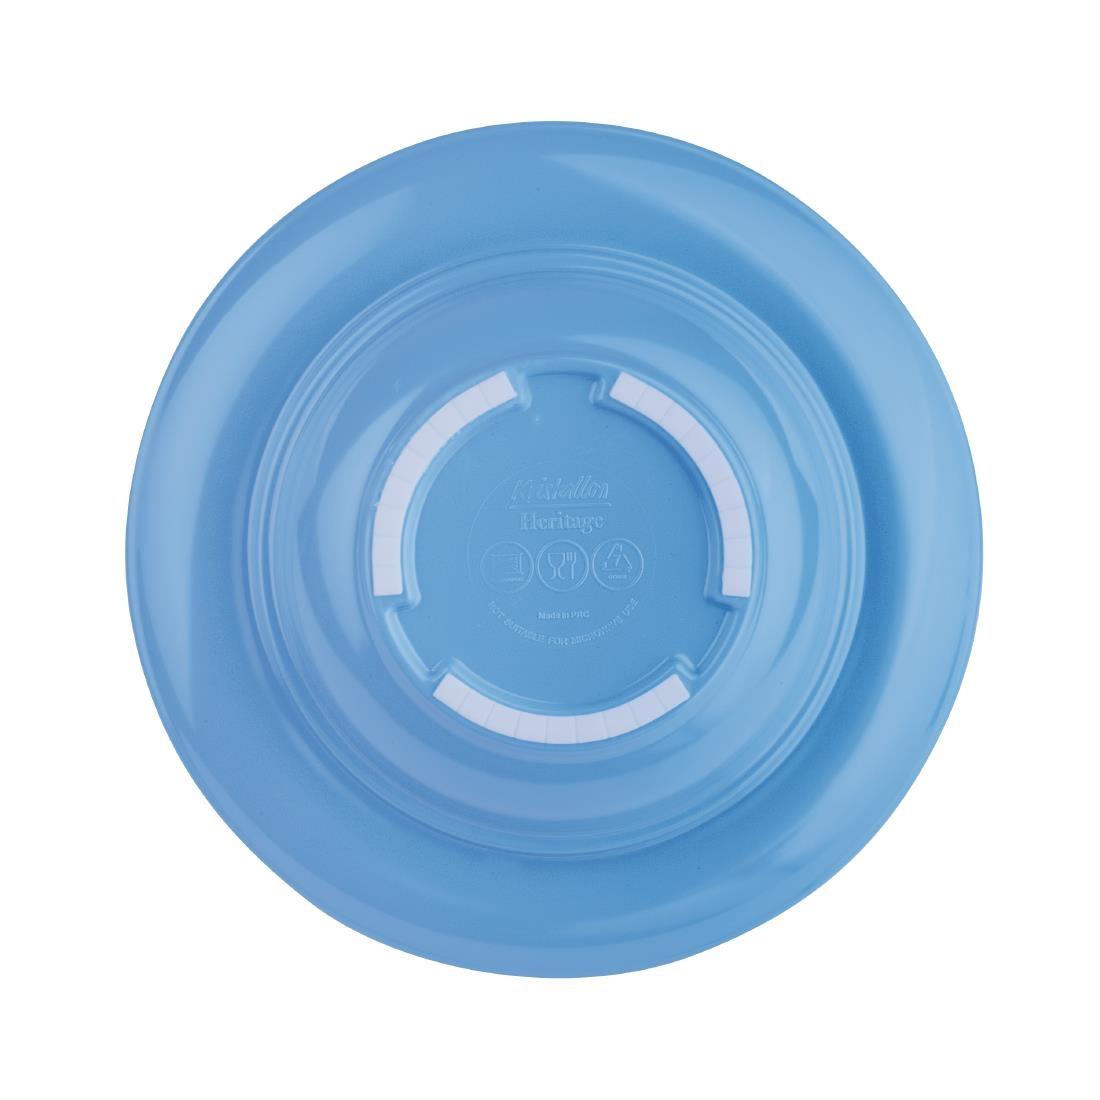 Olympia Kristallon HeritageRaised Rim Bowls Blue 205mm (Pack of 4) - DW702  - 5